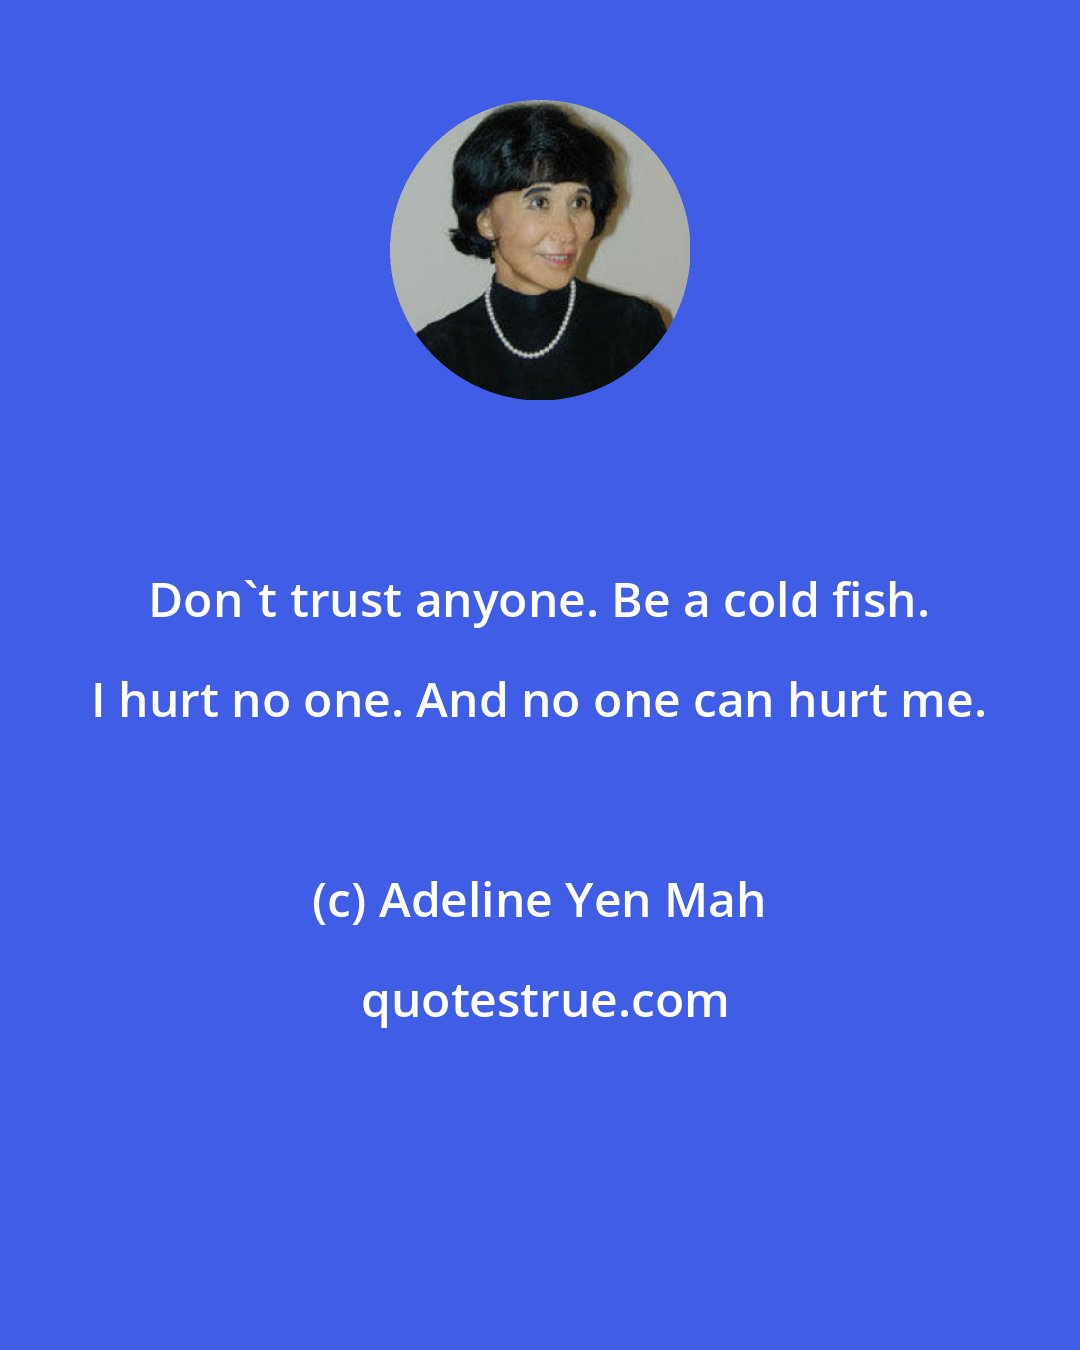 Adeline Yen Mah: Don't trust anyone. Be a cold fish. I hurt no one. And no one can hurt me.